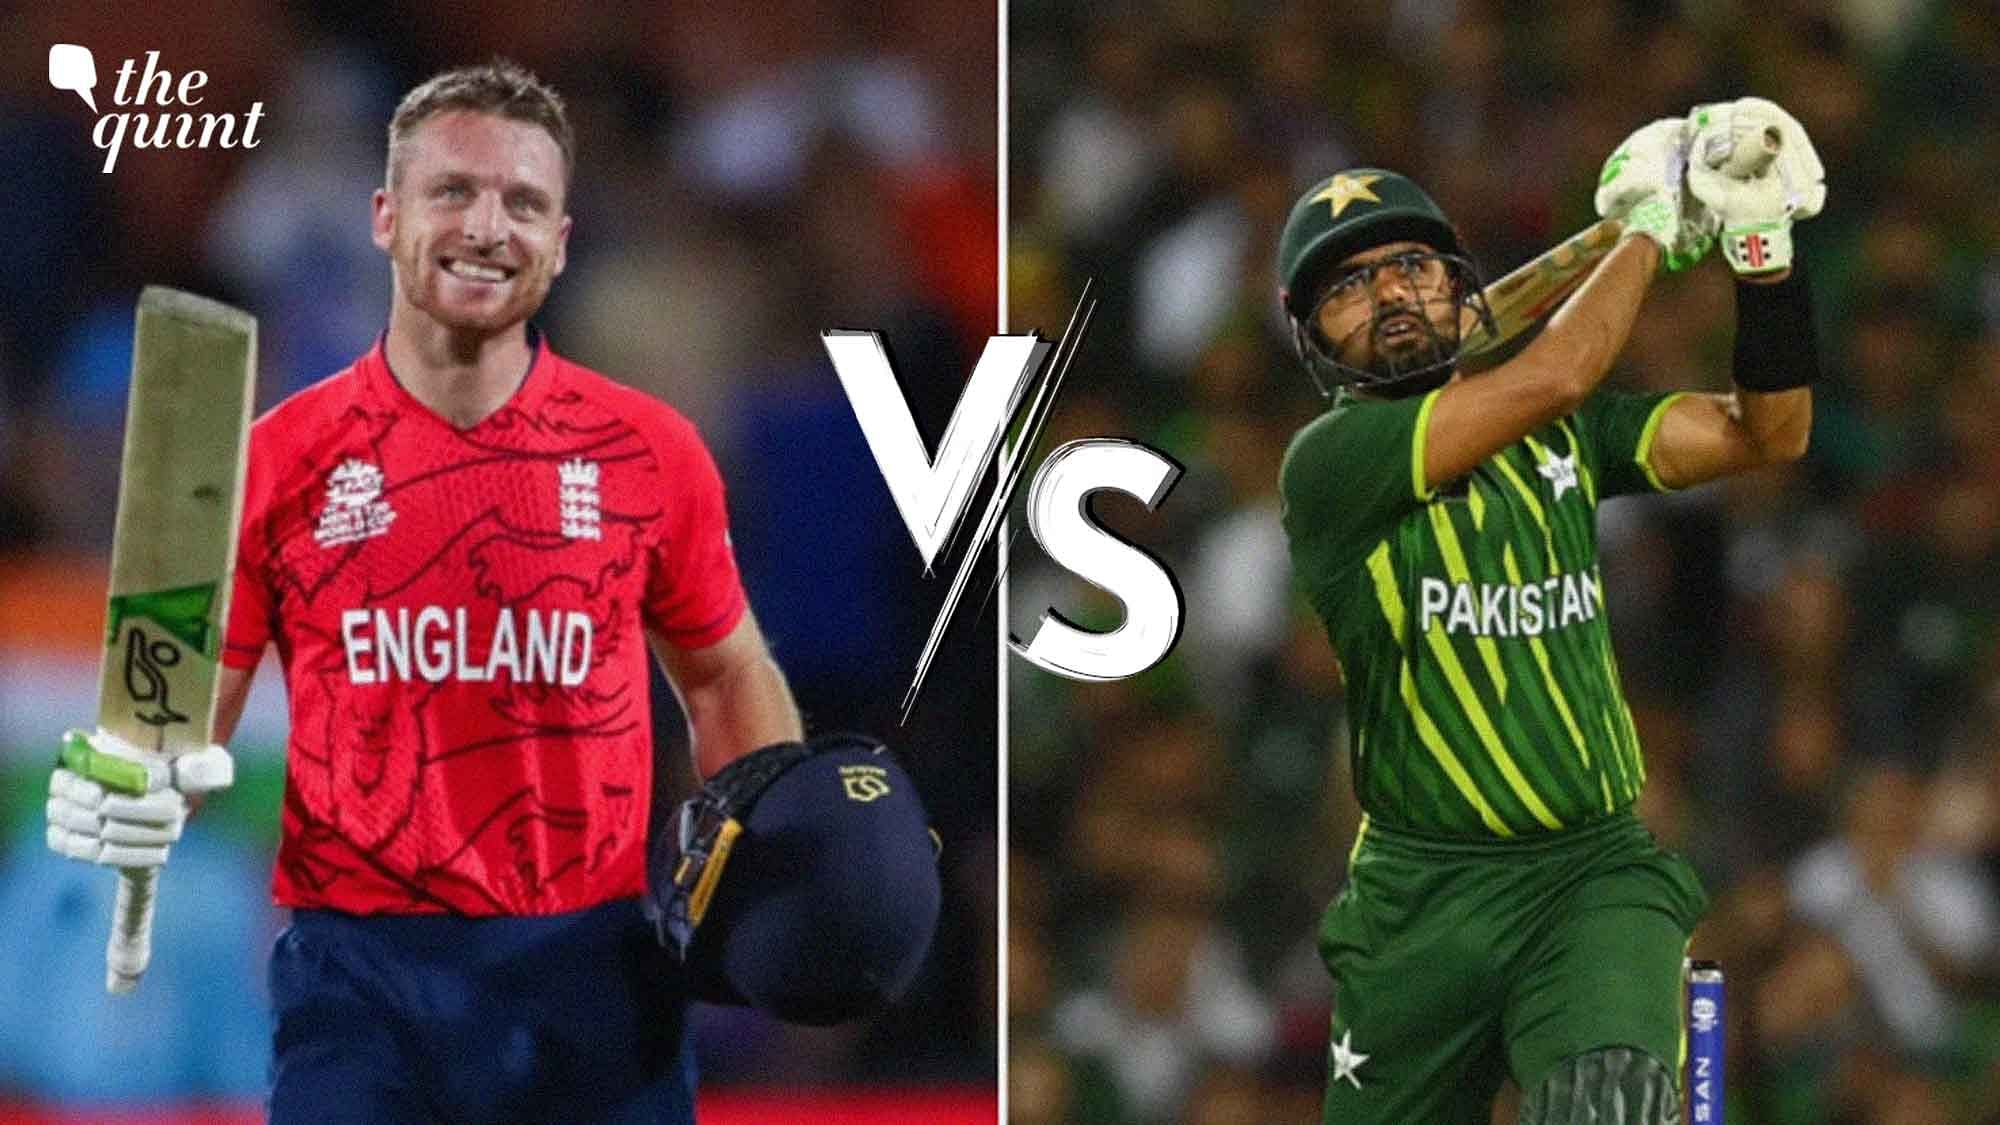 Pakistan Vs England Live Streaming Where To Watch Pak Vs Eng Cricket World Cup